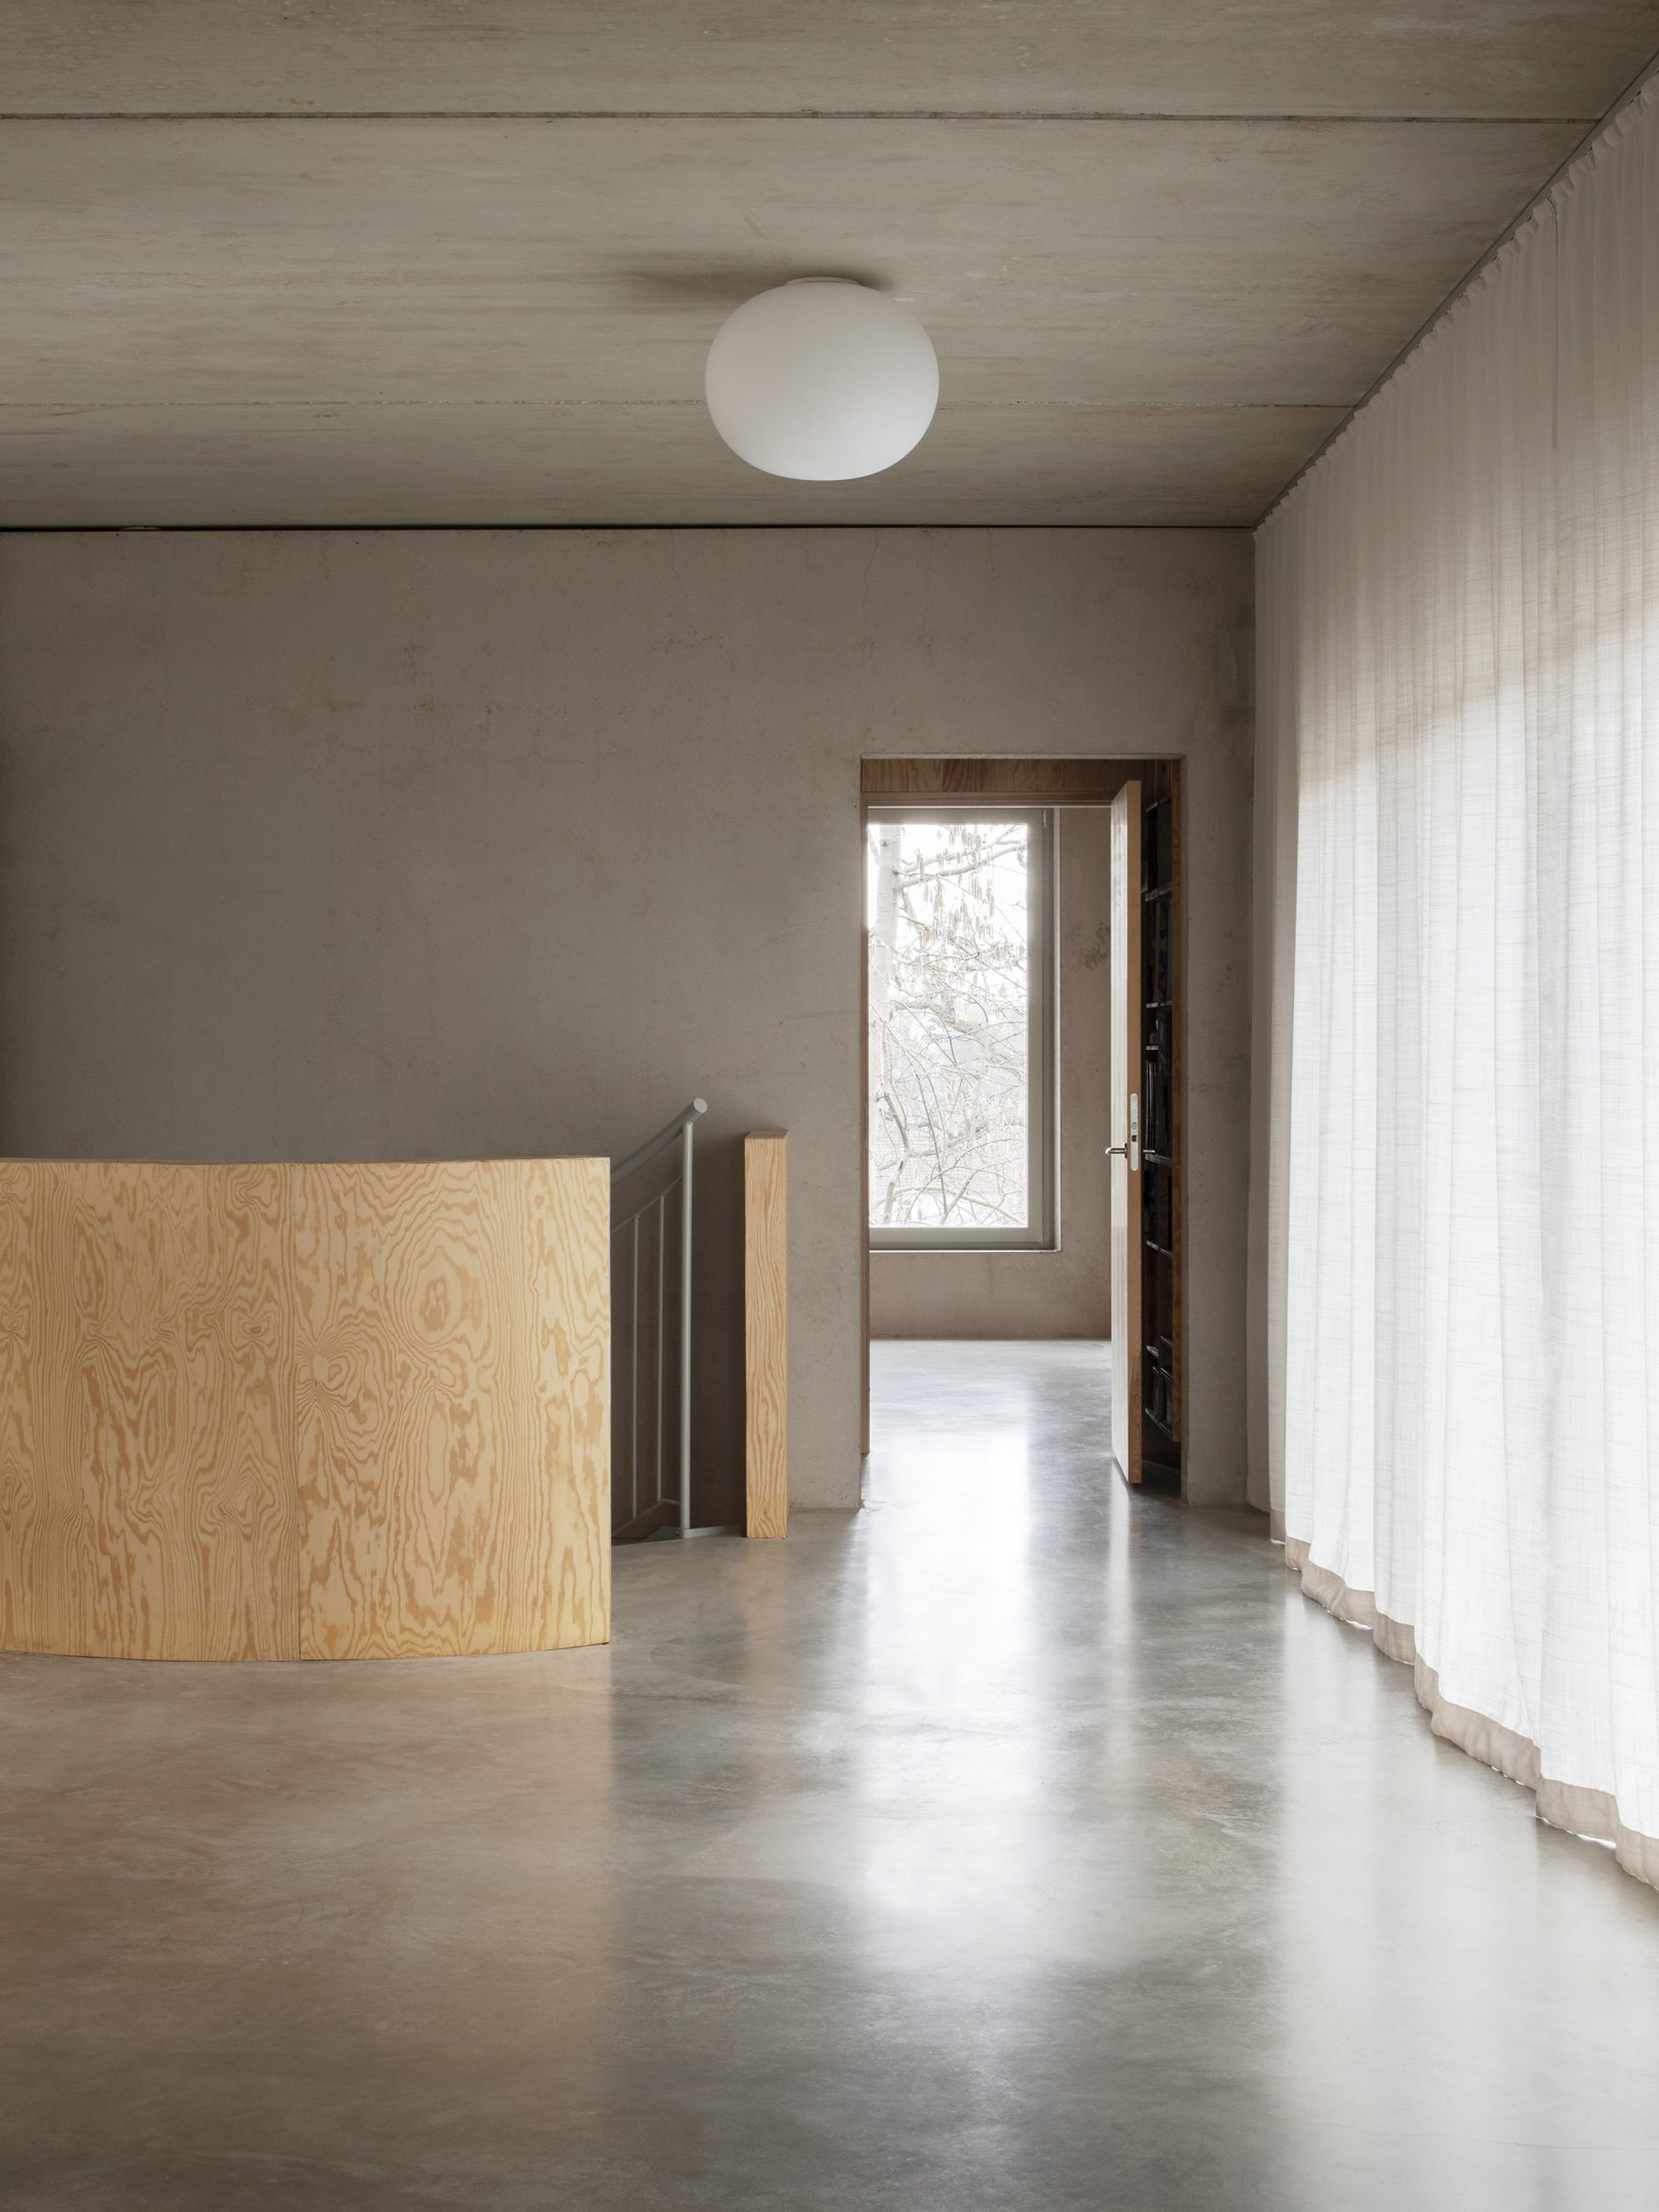 Concrete interior with plywood staircase